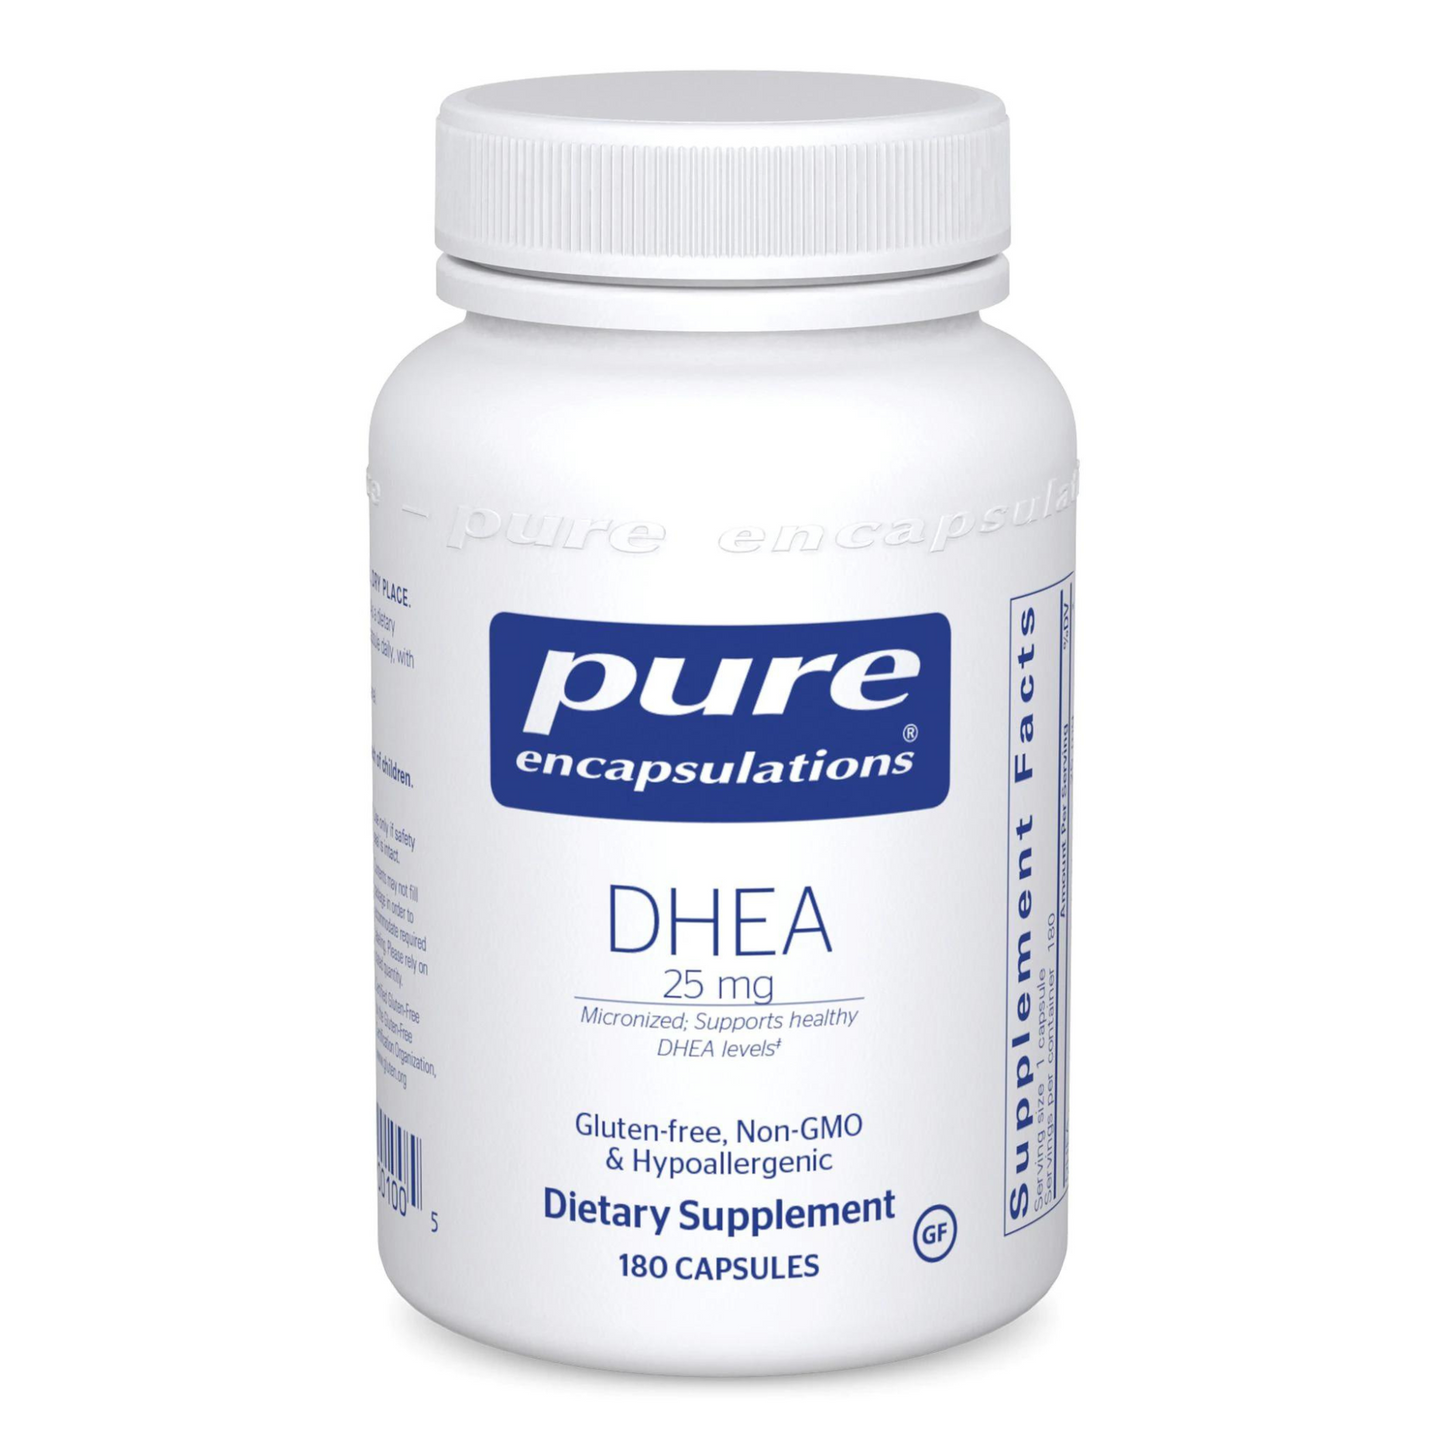 Primary Image of DHEA 25 mg. Capsules (180 count)